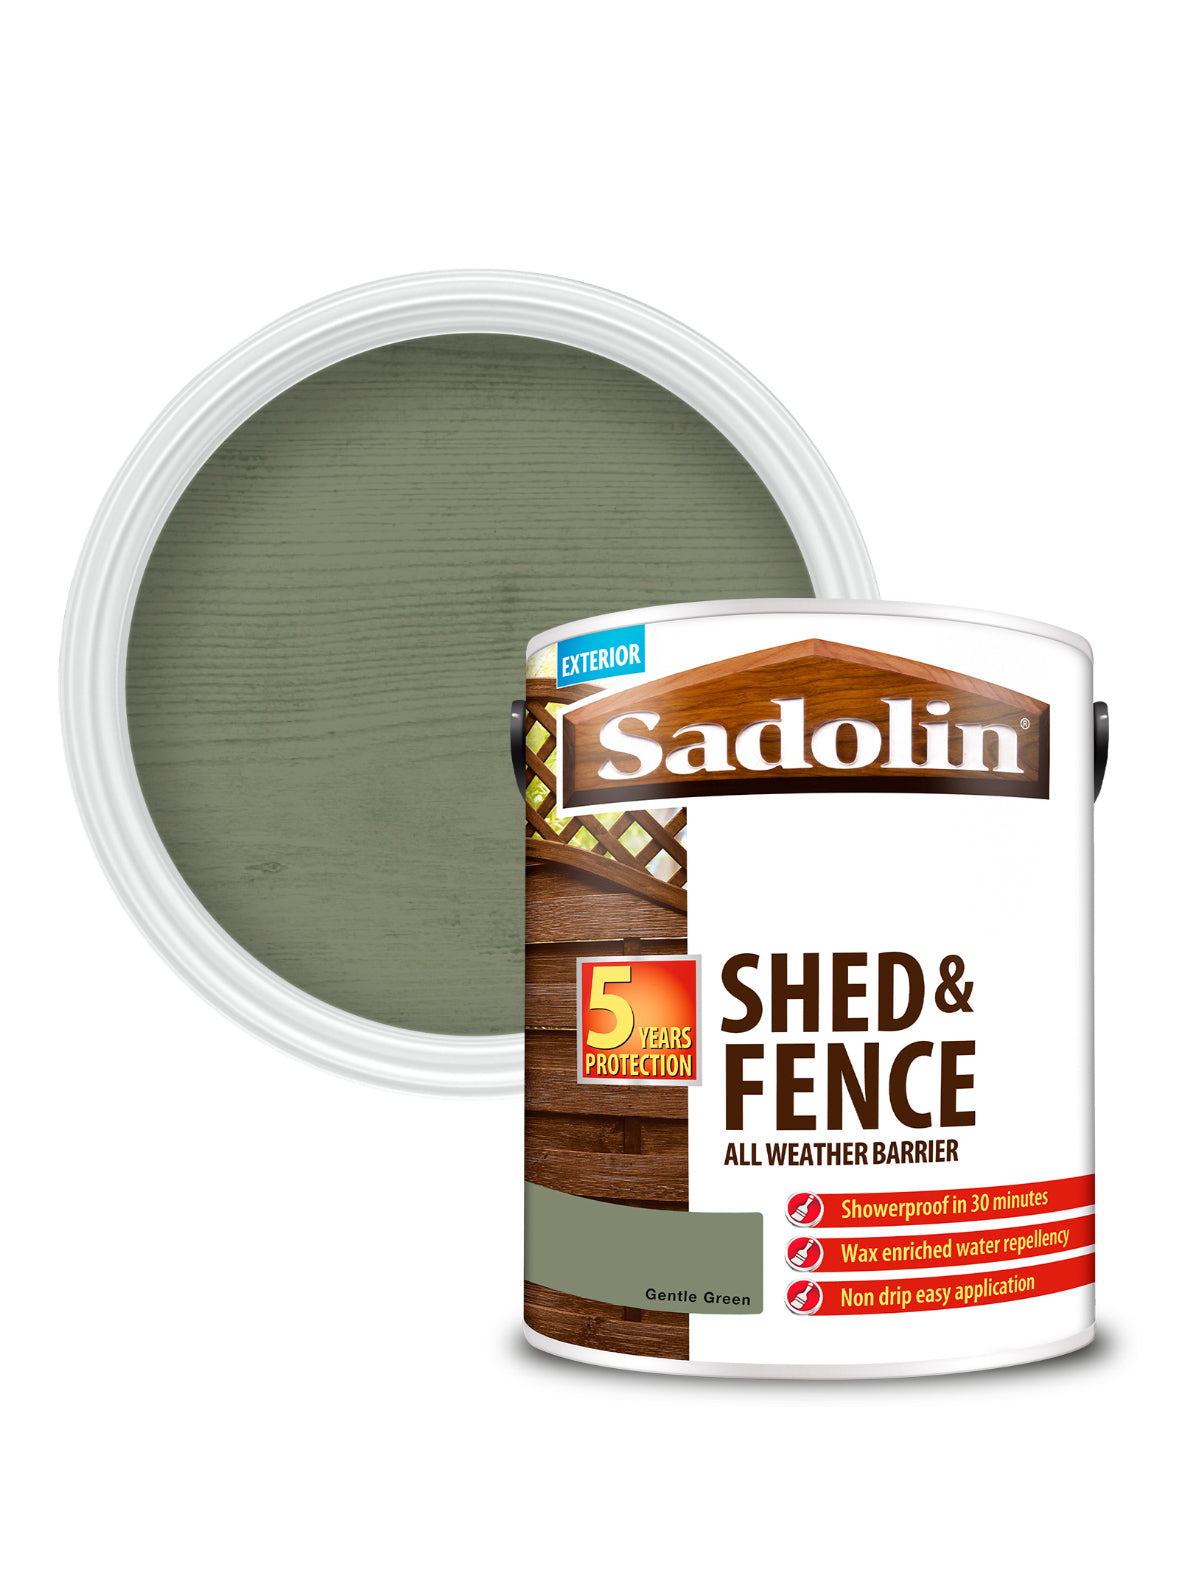 Sadolin Shed and Fence Protector All Weather Barrier 5 Litre